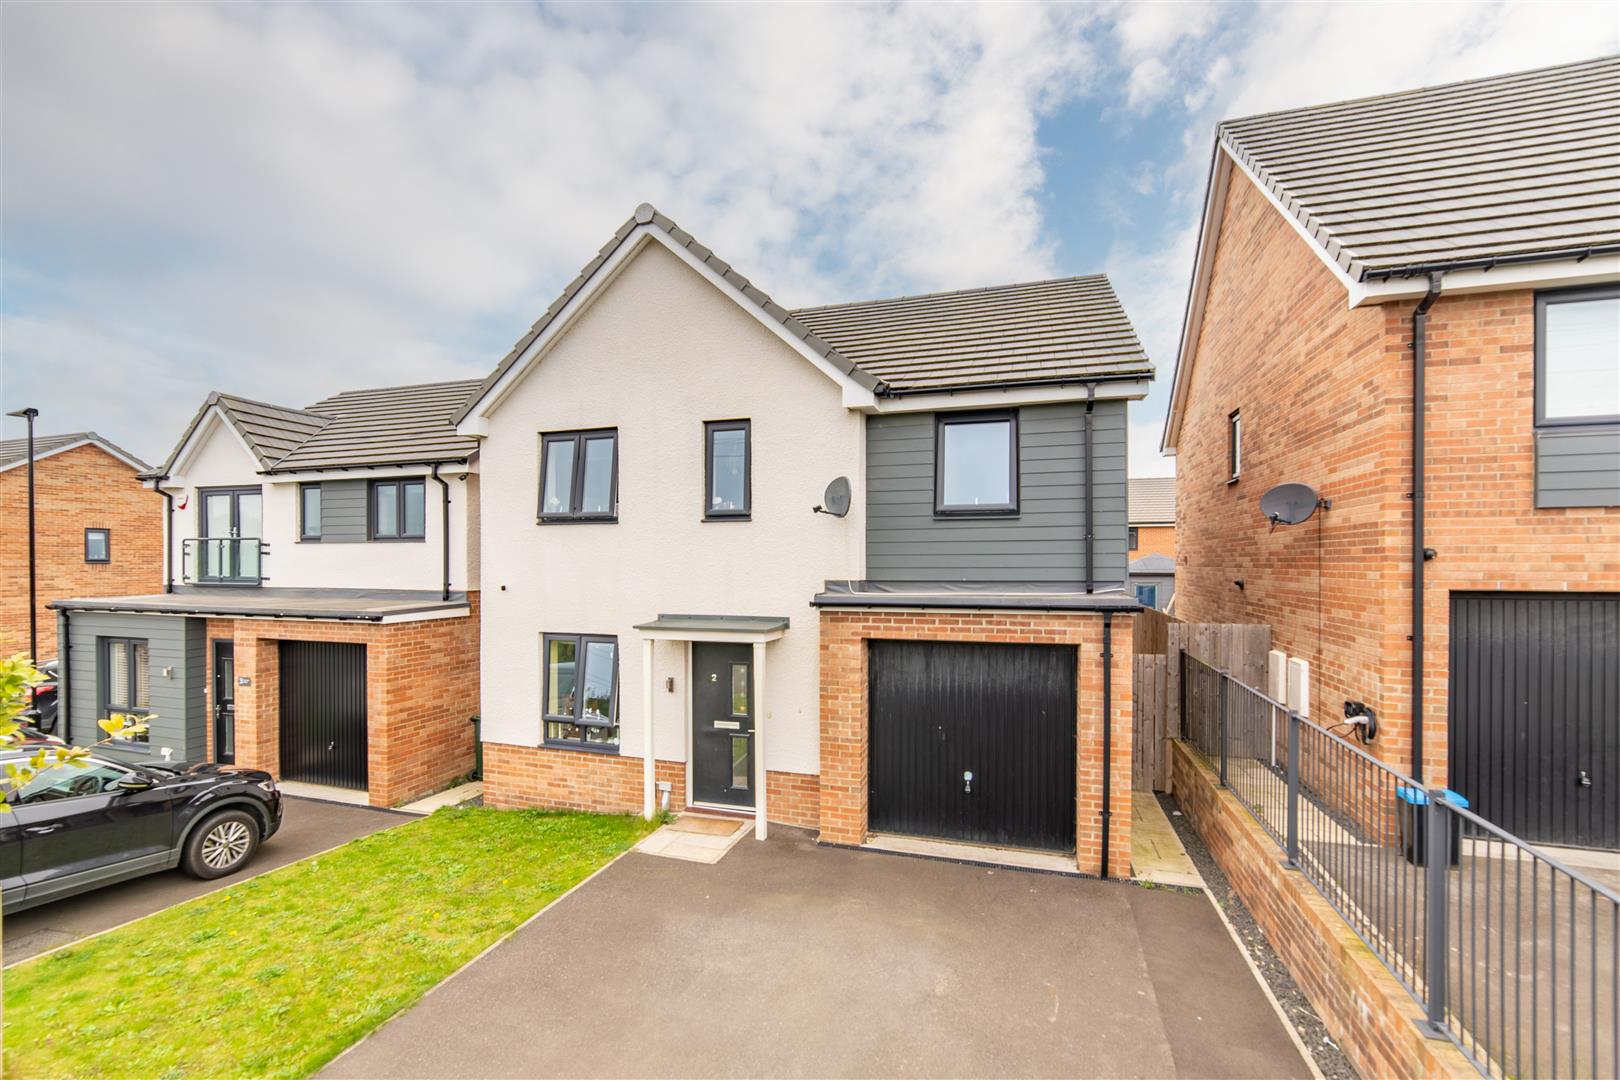 4 bed detached house for sale in Comma Close, Great Park, NE13